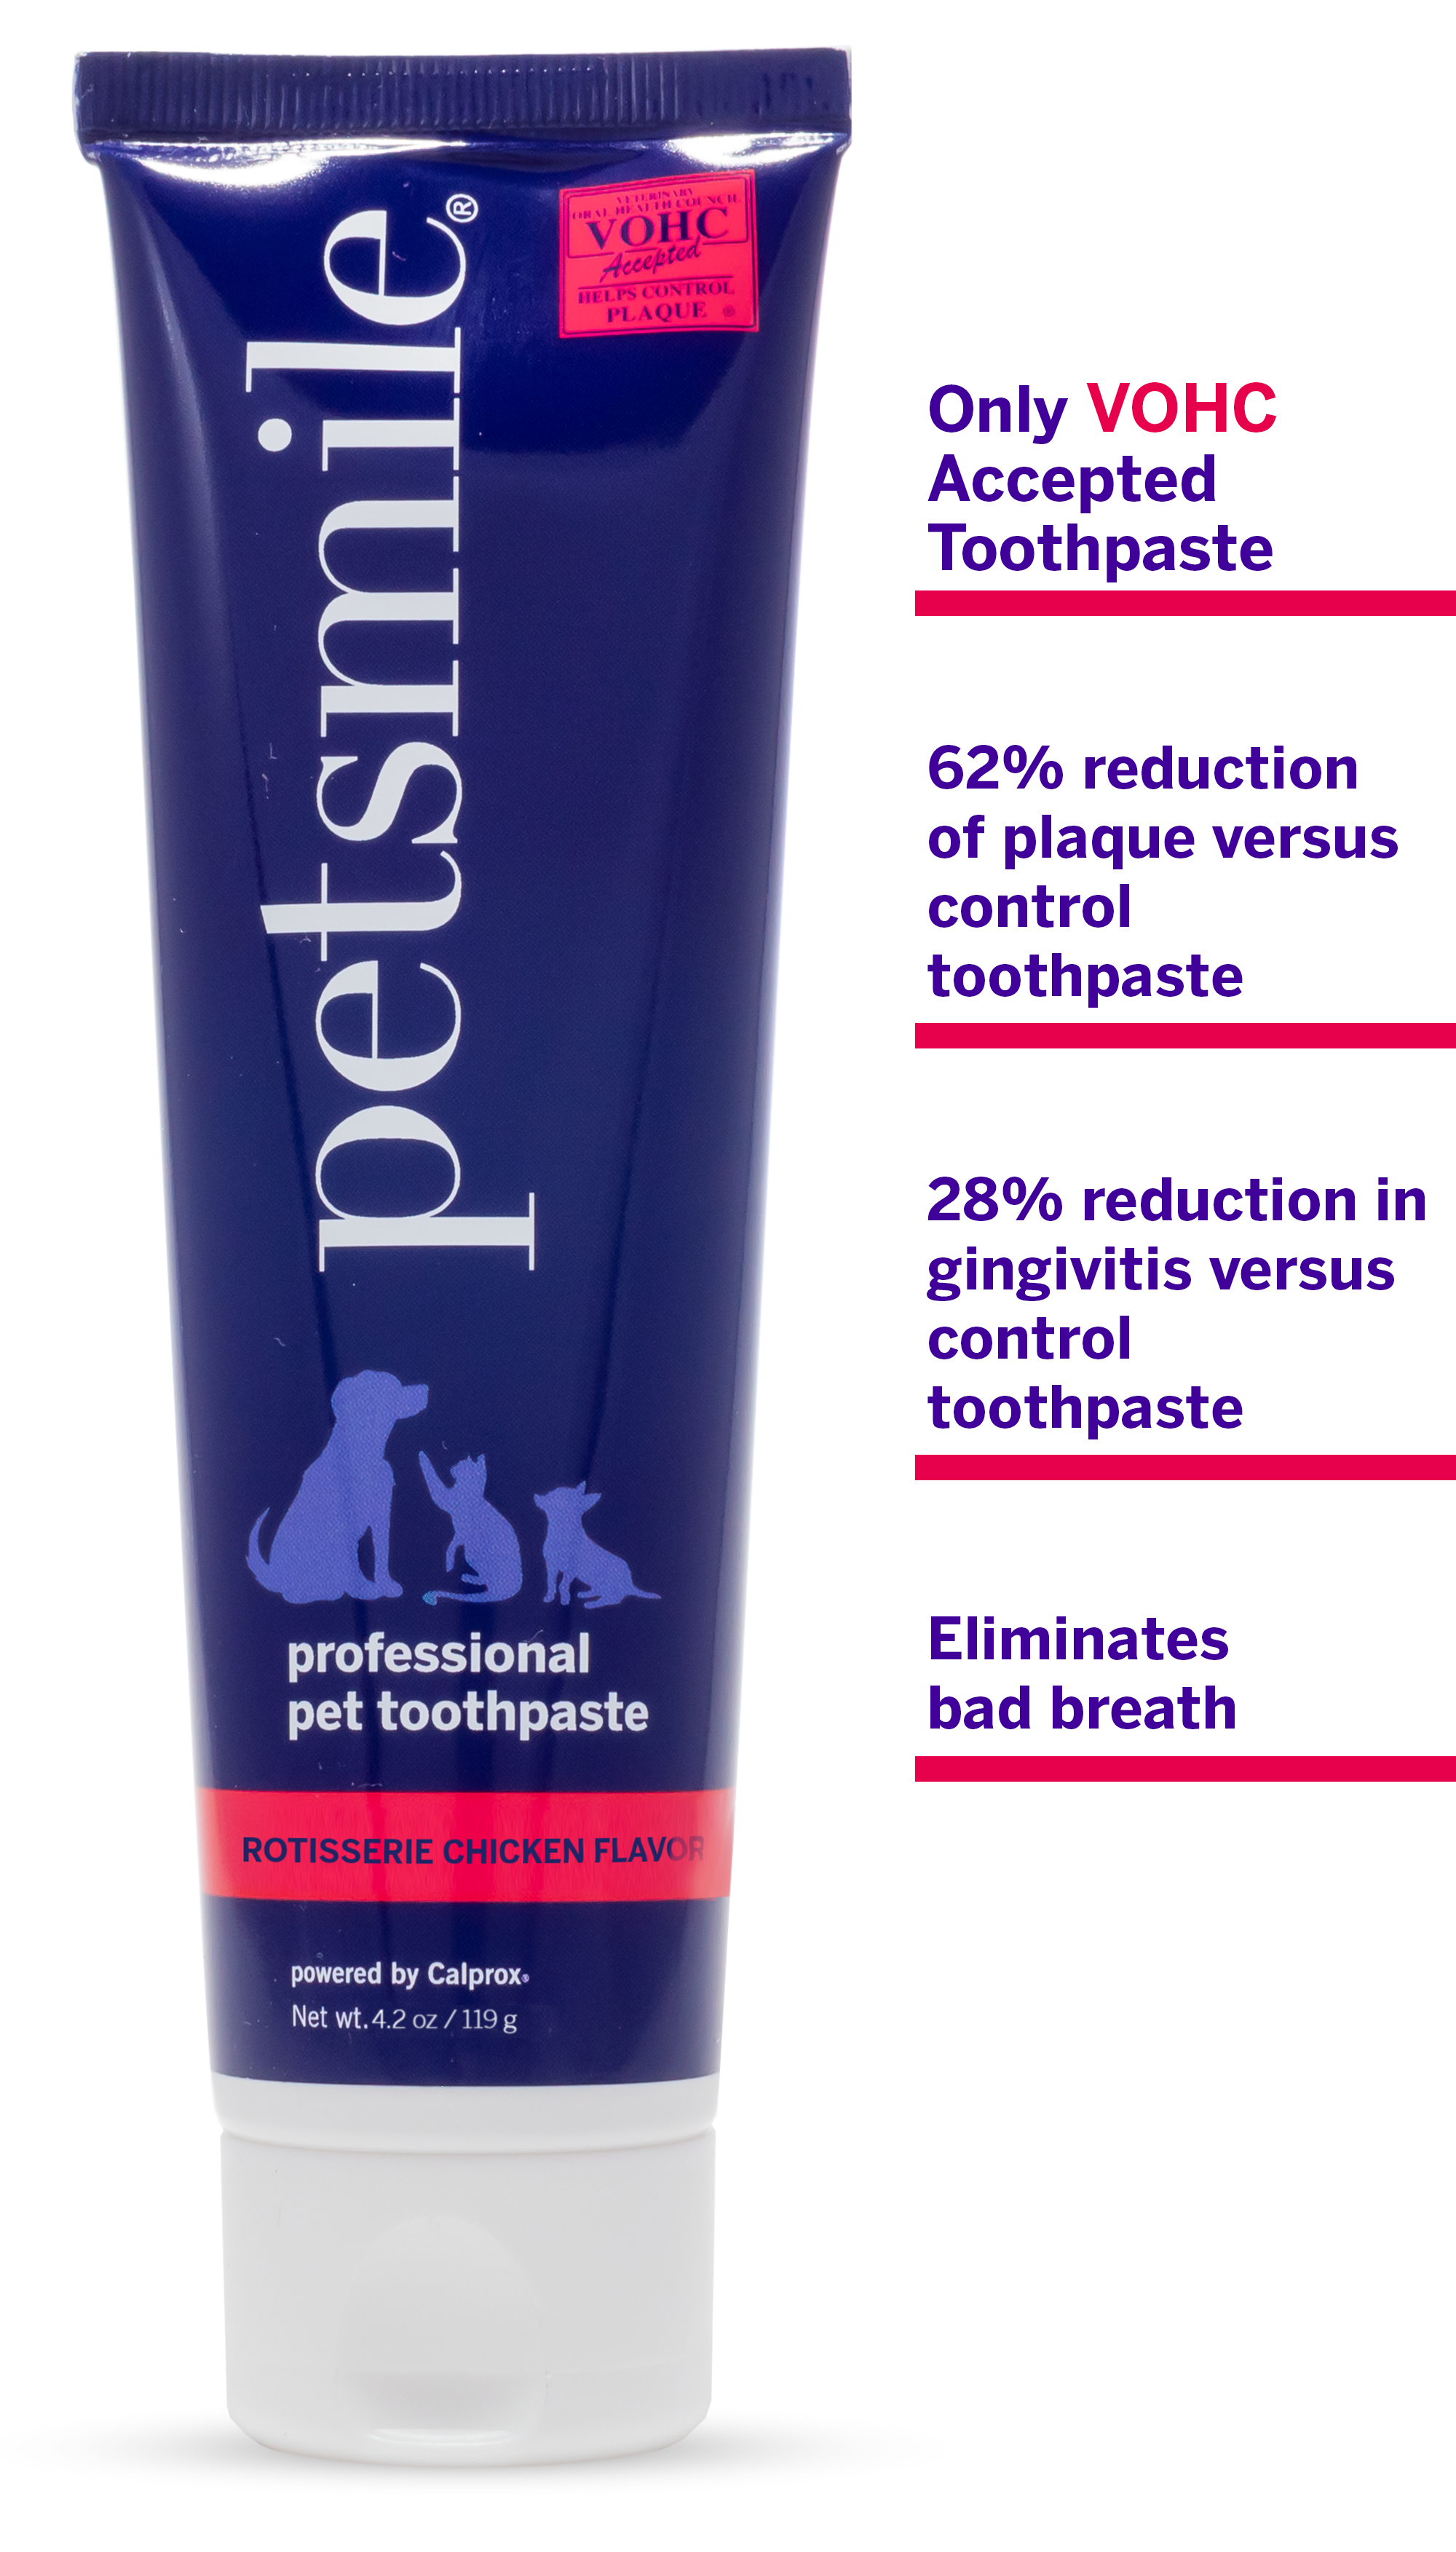 Best toothpaste for dogs , Large tube of petsmile dog toothpaste that is delicious , Clean teeth for all dogs , 62% greater in plaque reduction, 28% greater in gingivitis reduction , Chicken Flavor, Unbelievable taste , Fresh breath, VOHC sealed